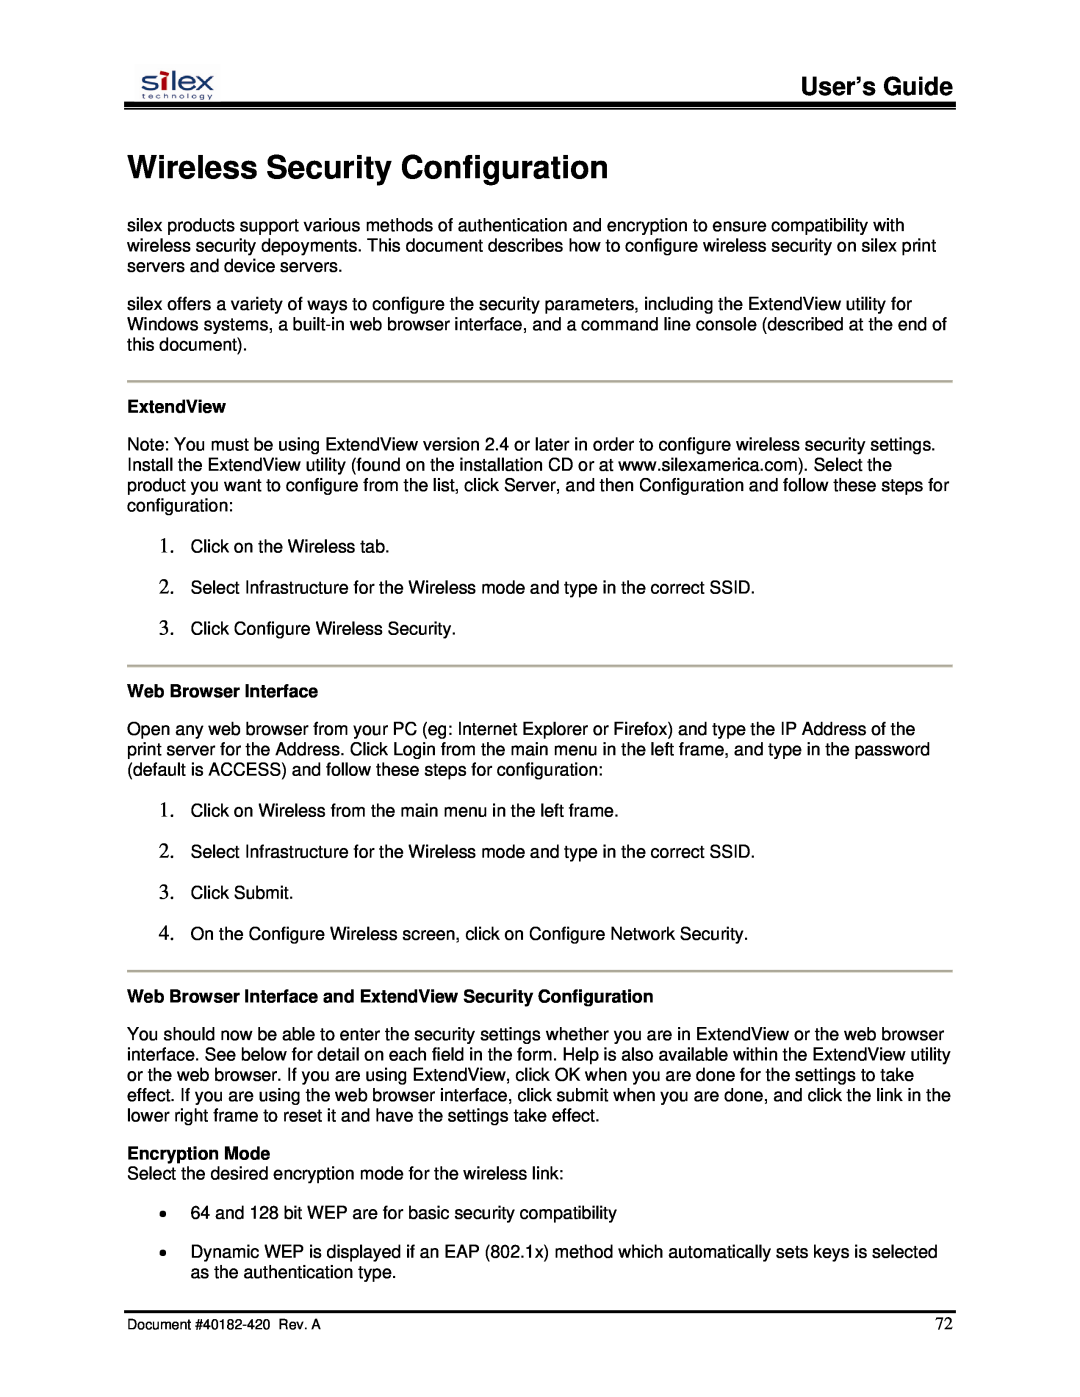 Silex technology SX-200 Wireless Security Configuration, User’s Guide, ExtendView, Web Browser Interface, Encryption Mode 